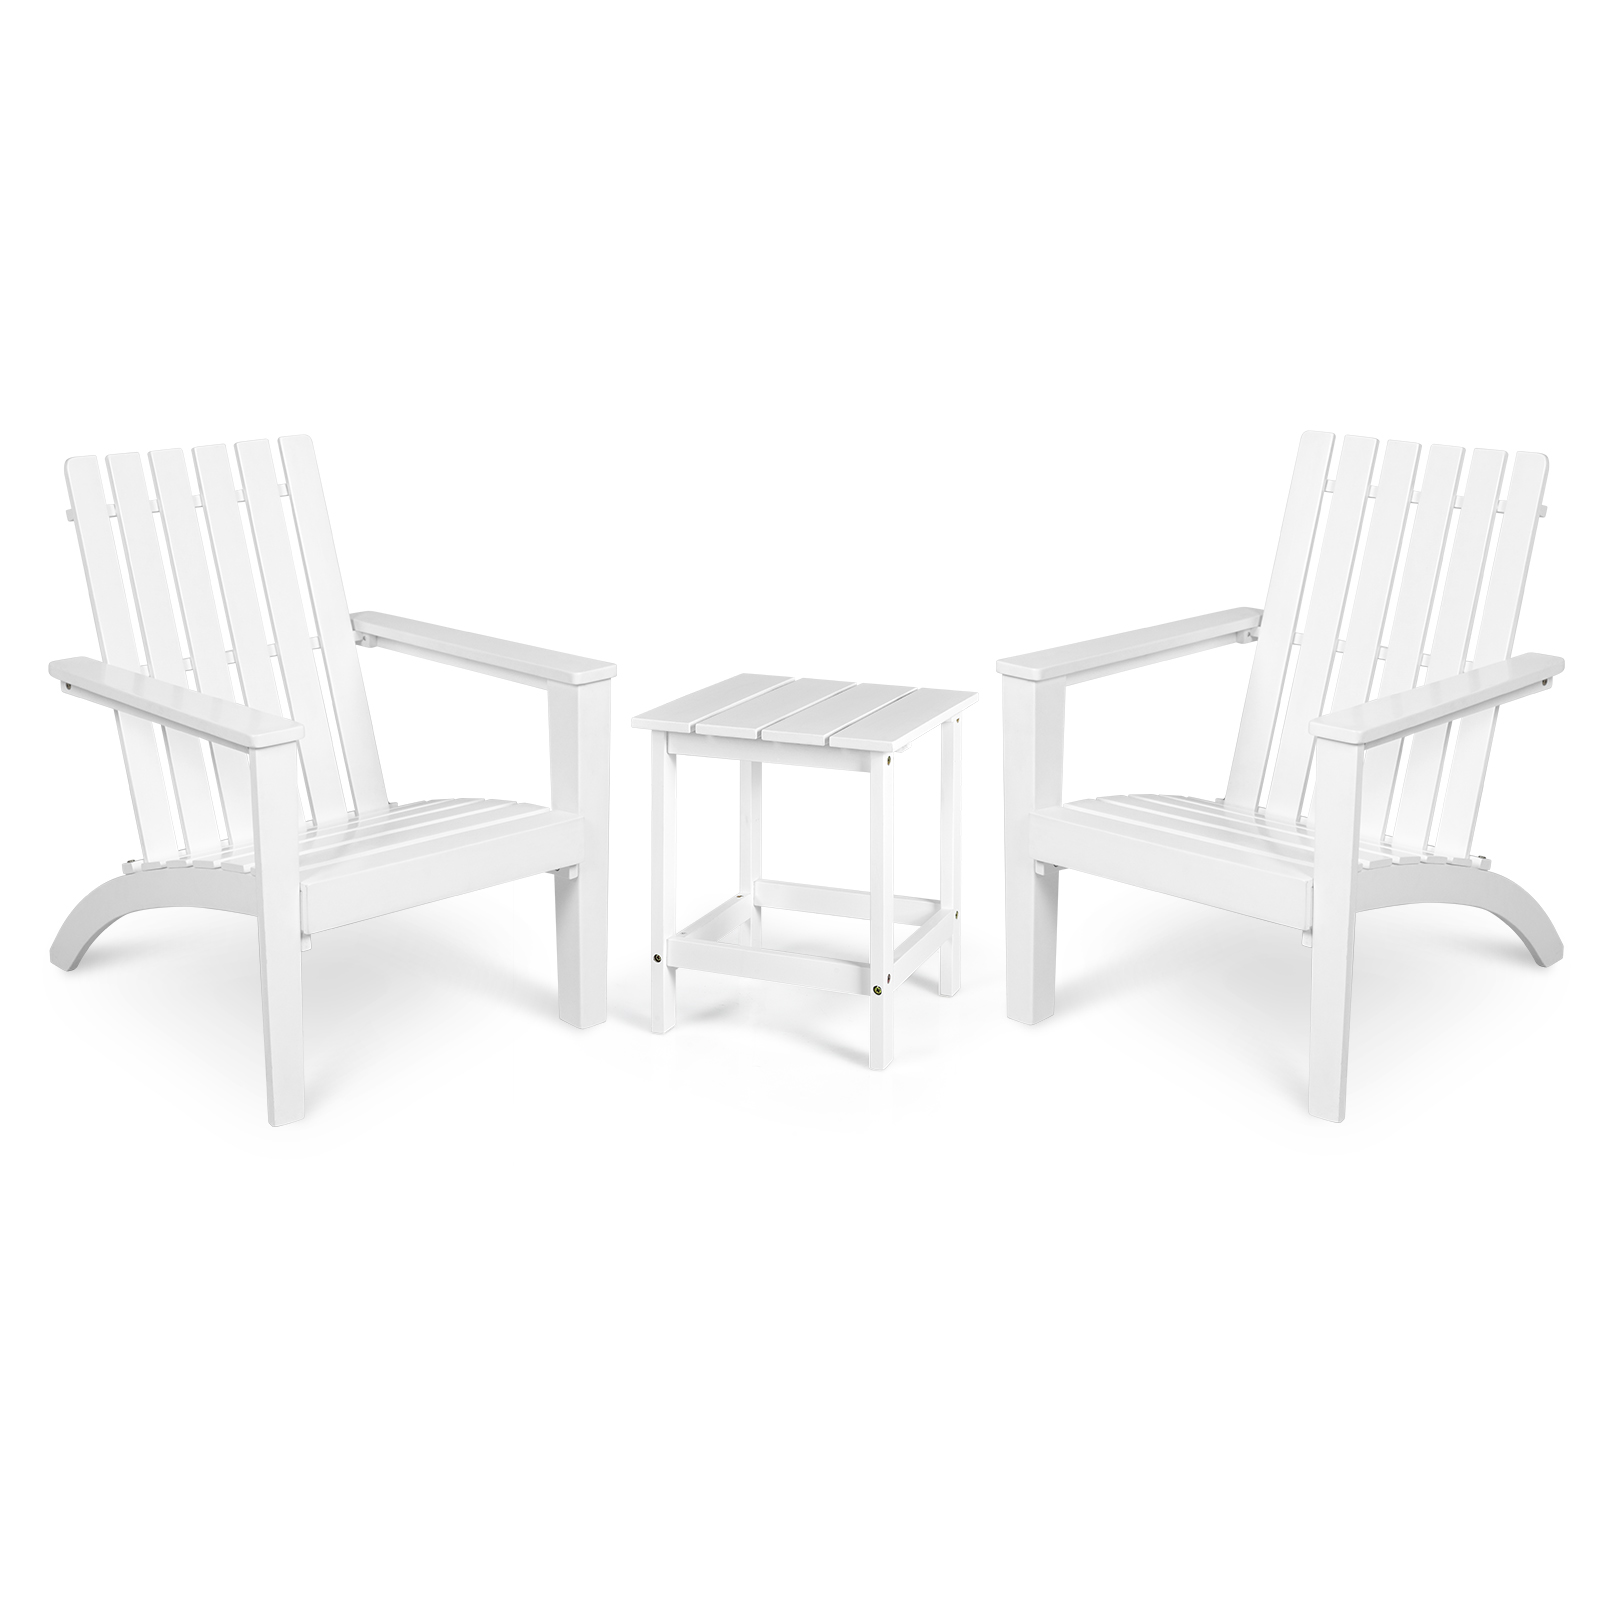 Patiojoy 3PCS Patio Adirondack Chair Side Table Set Solid Wood Garden Deck Bistro Set Classic Furniture Chair Set White - image 1 of 10